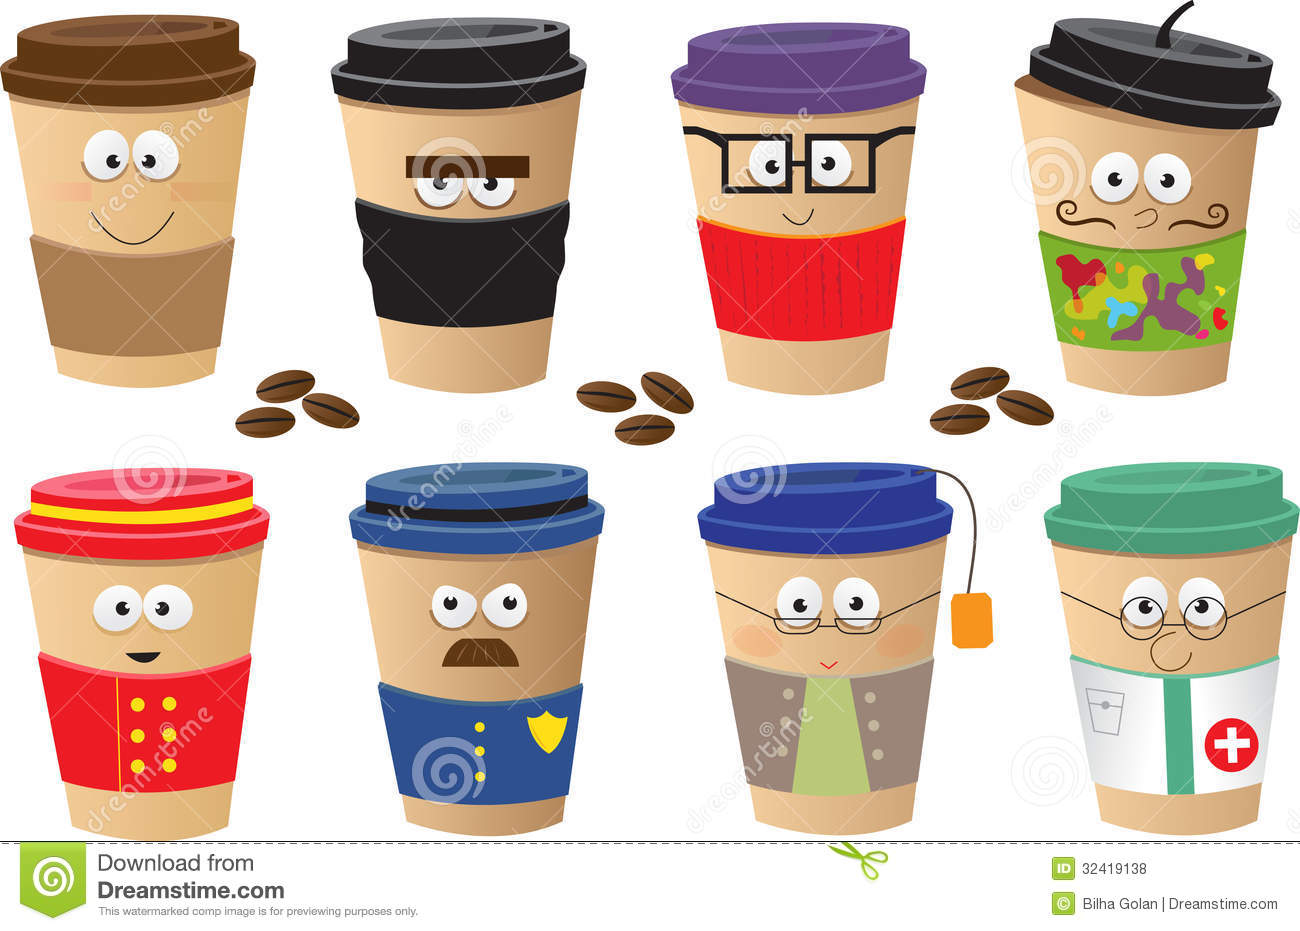 Coffee Cups Characters Royalty Free Stock Photos   Image  32419138